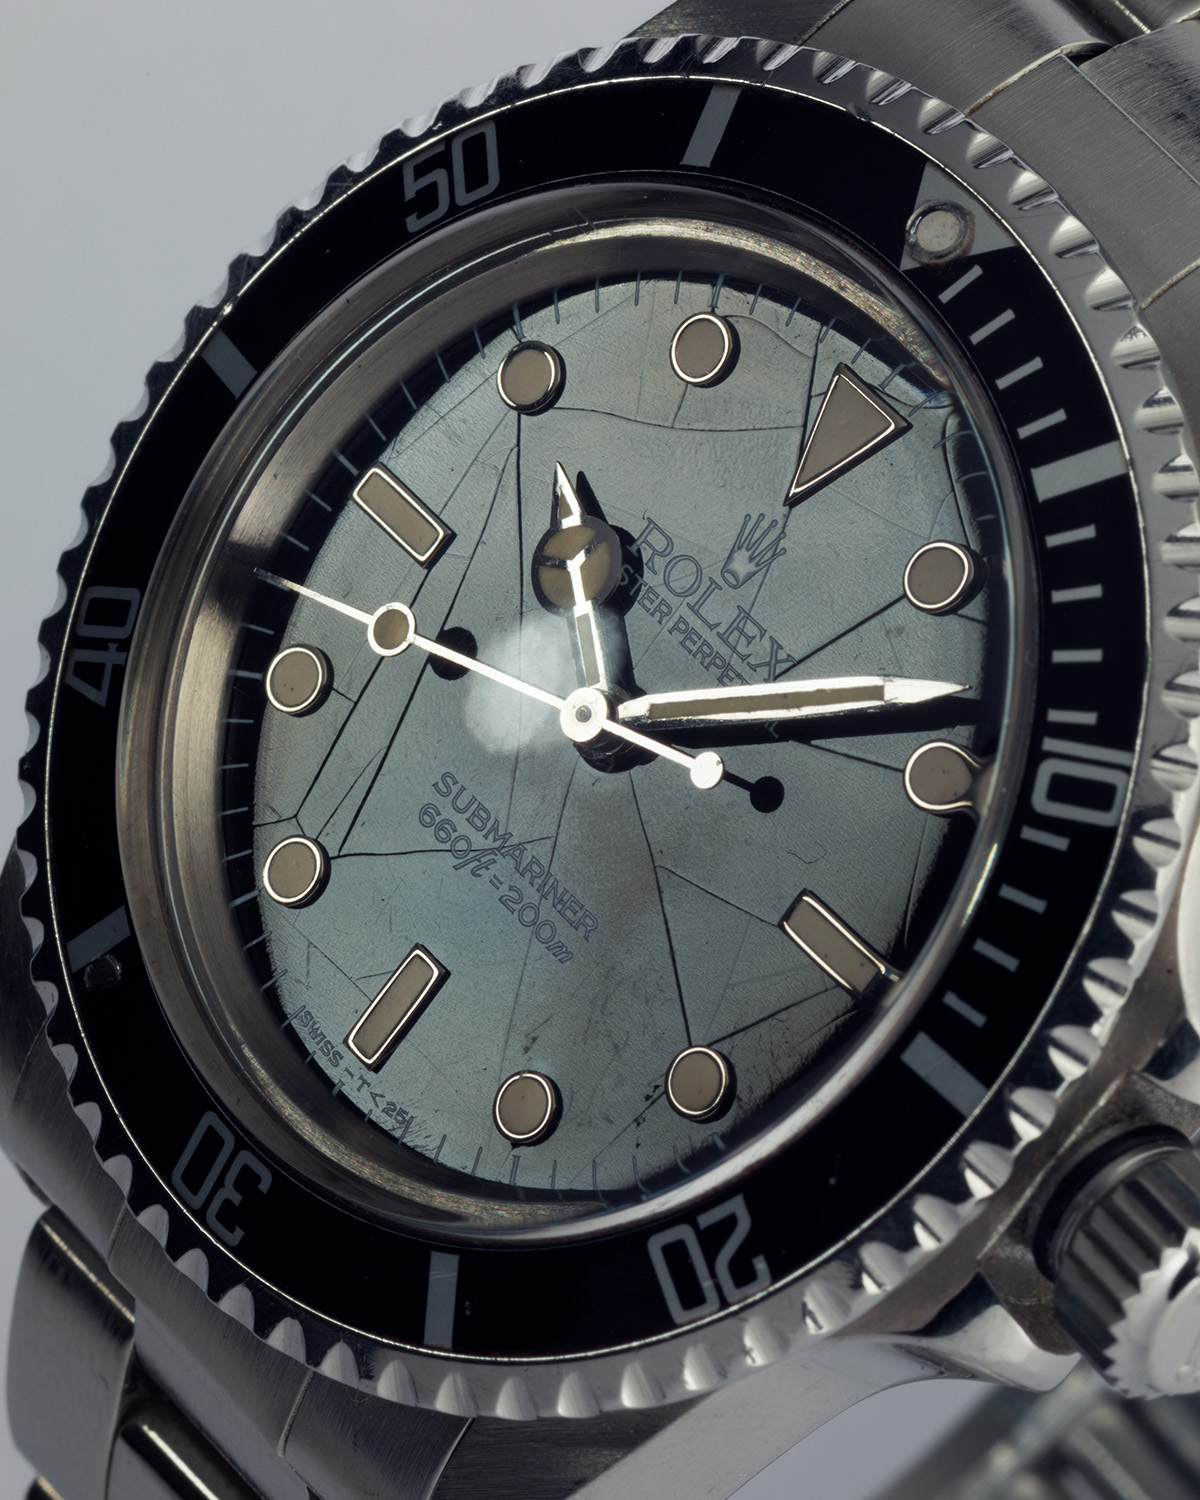 Vintage Rolex Submariner with glossy 